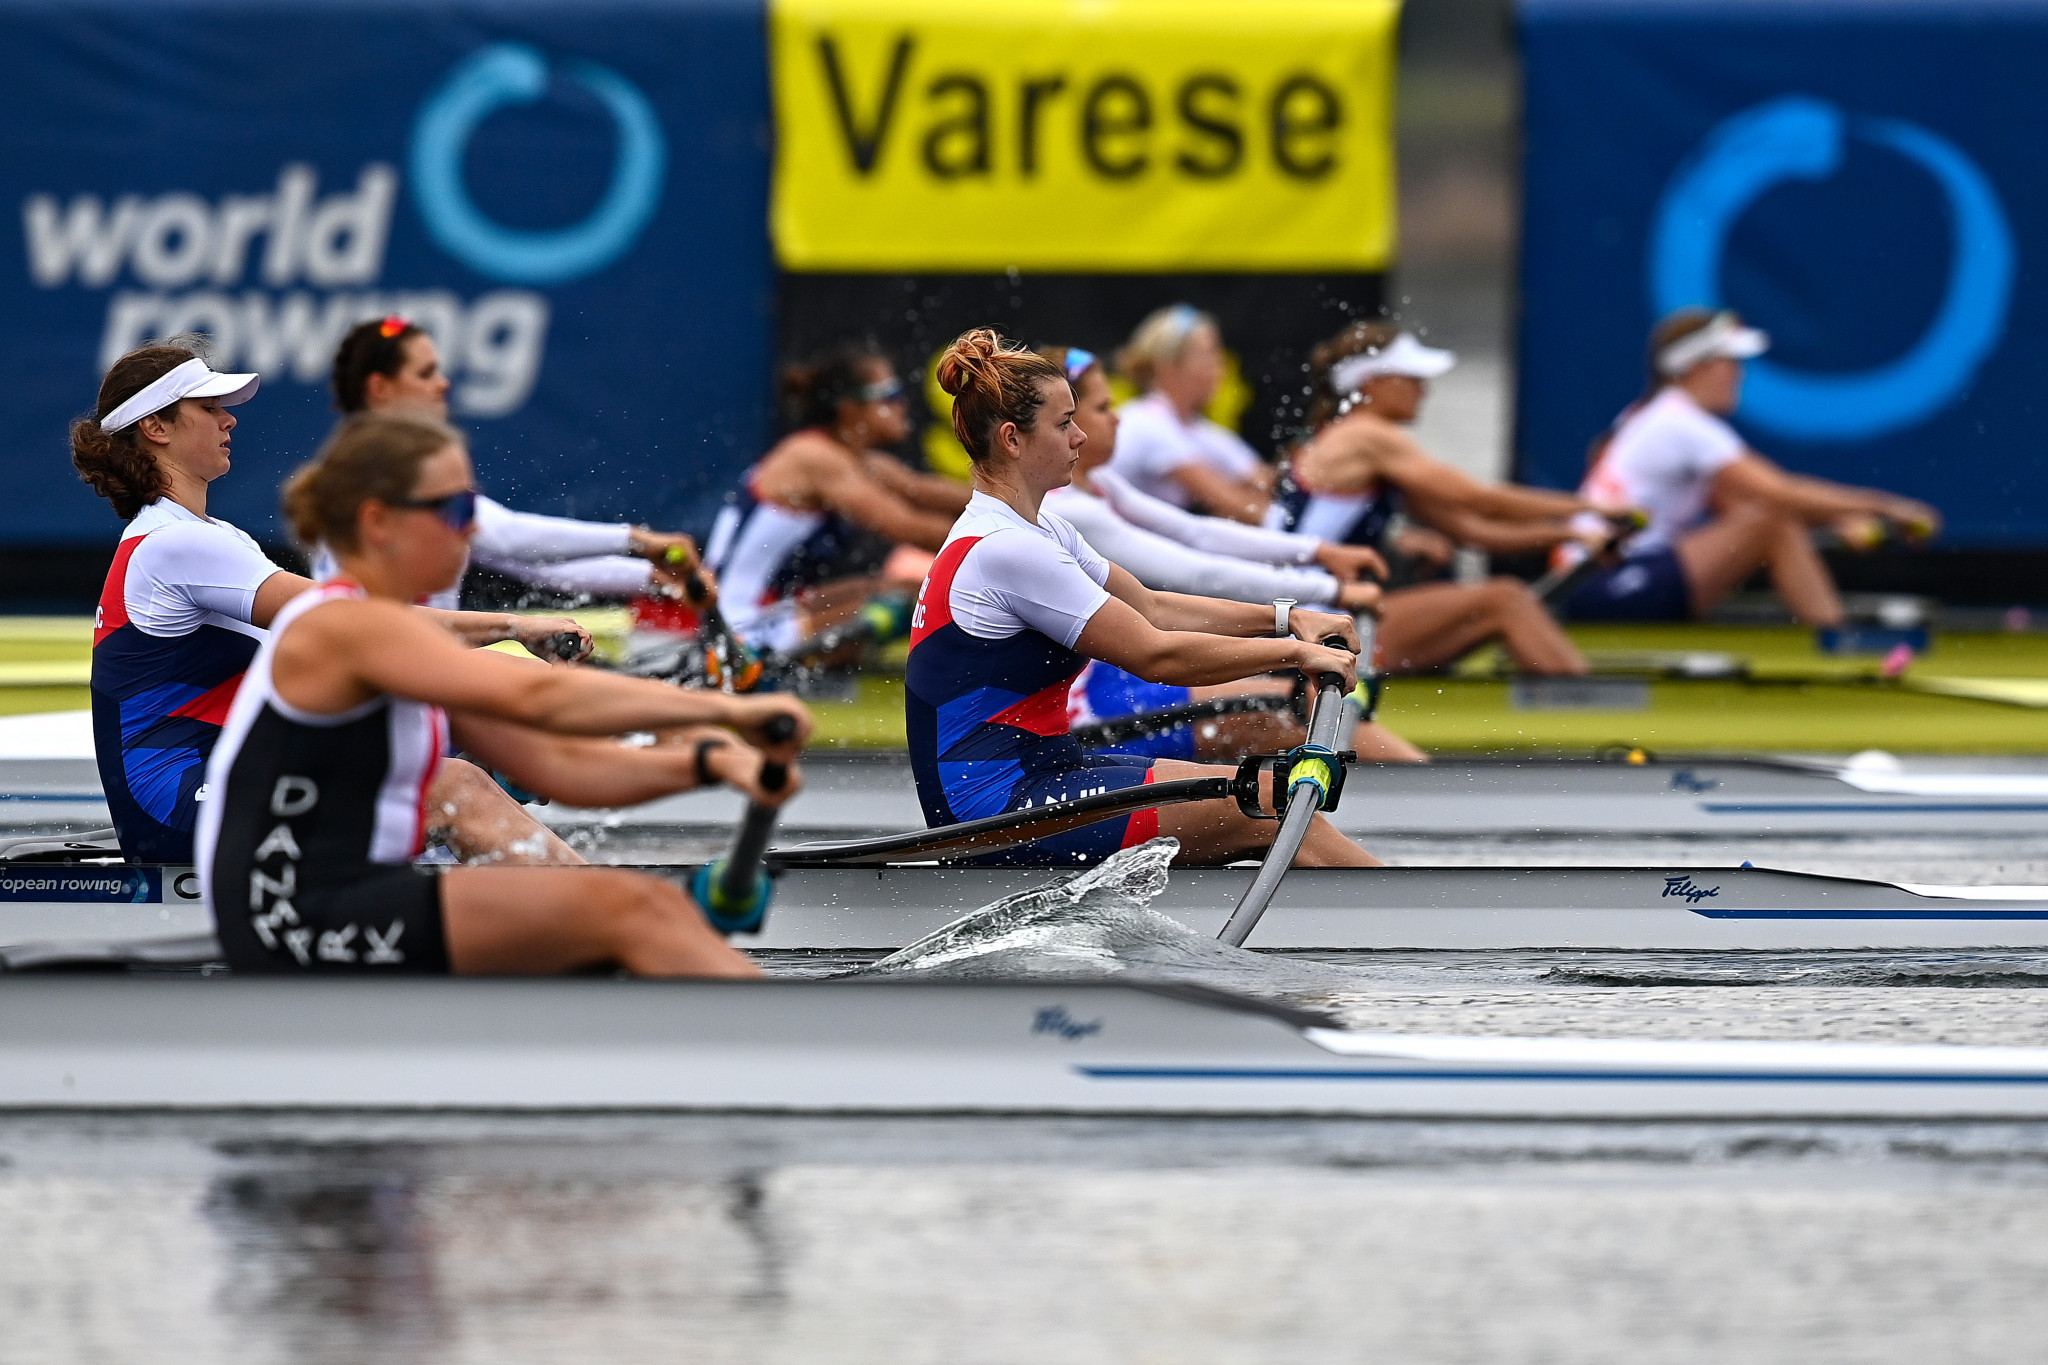 The Turkish delegation has been removed from European Rowing Championships in Varese, Italy after three of its team tested positive for COVID-19 ©Getty Images